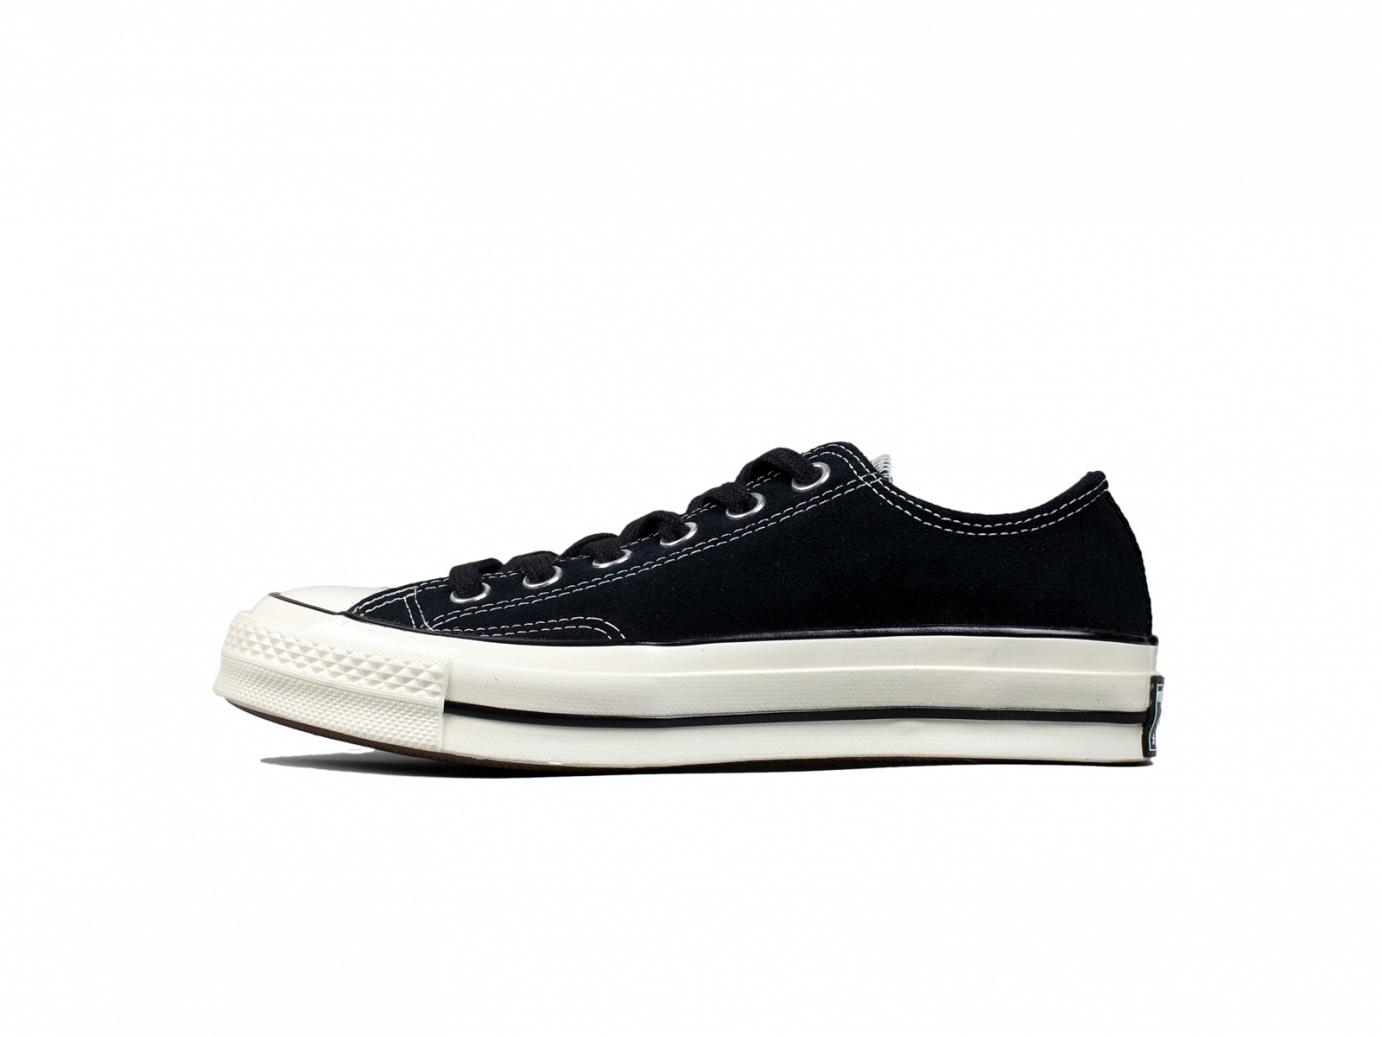 Chuck Taylor All Star 70 black suede 163759C